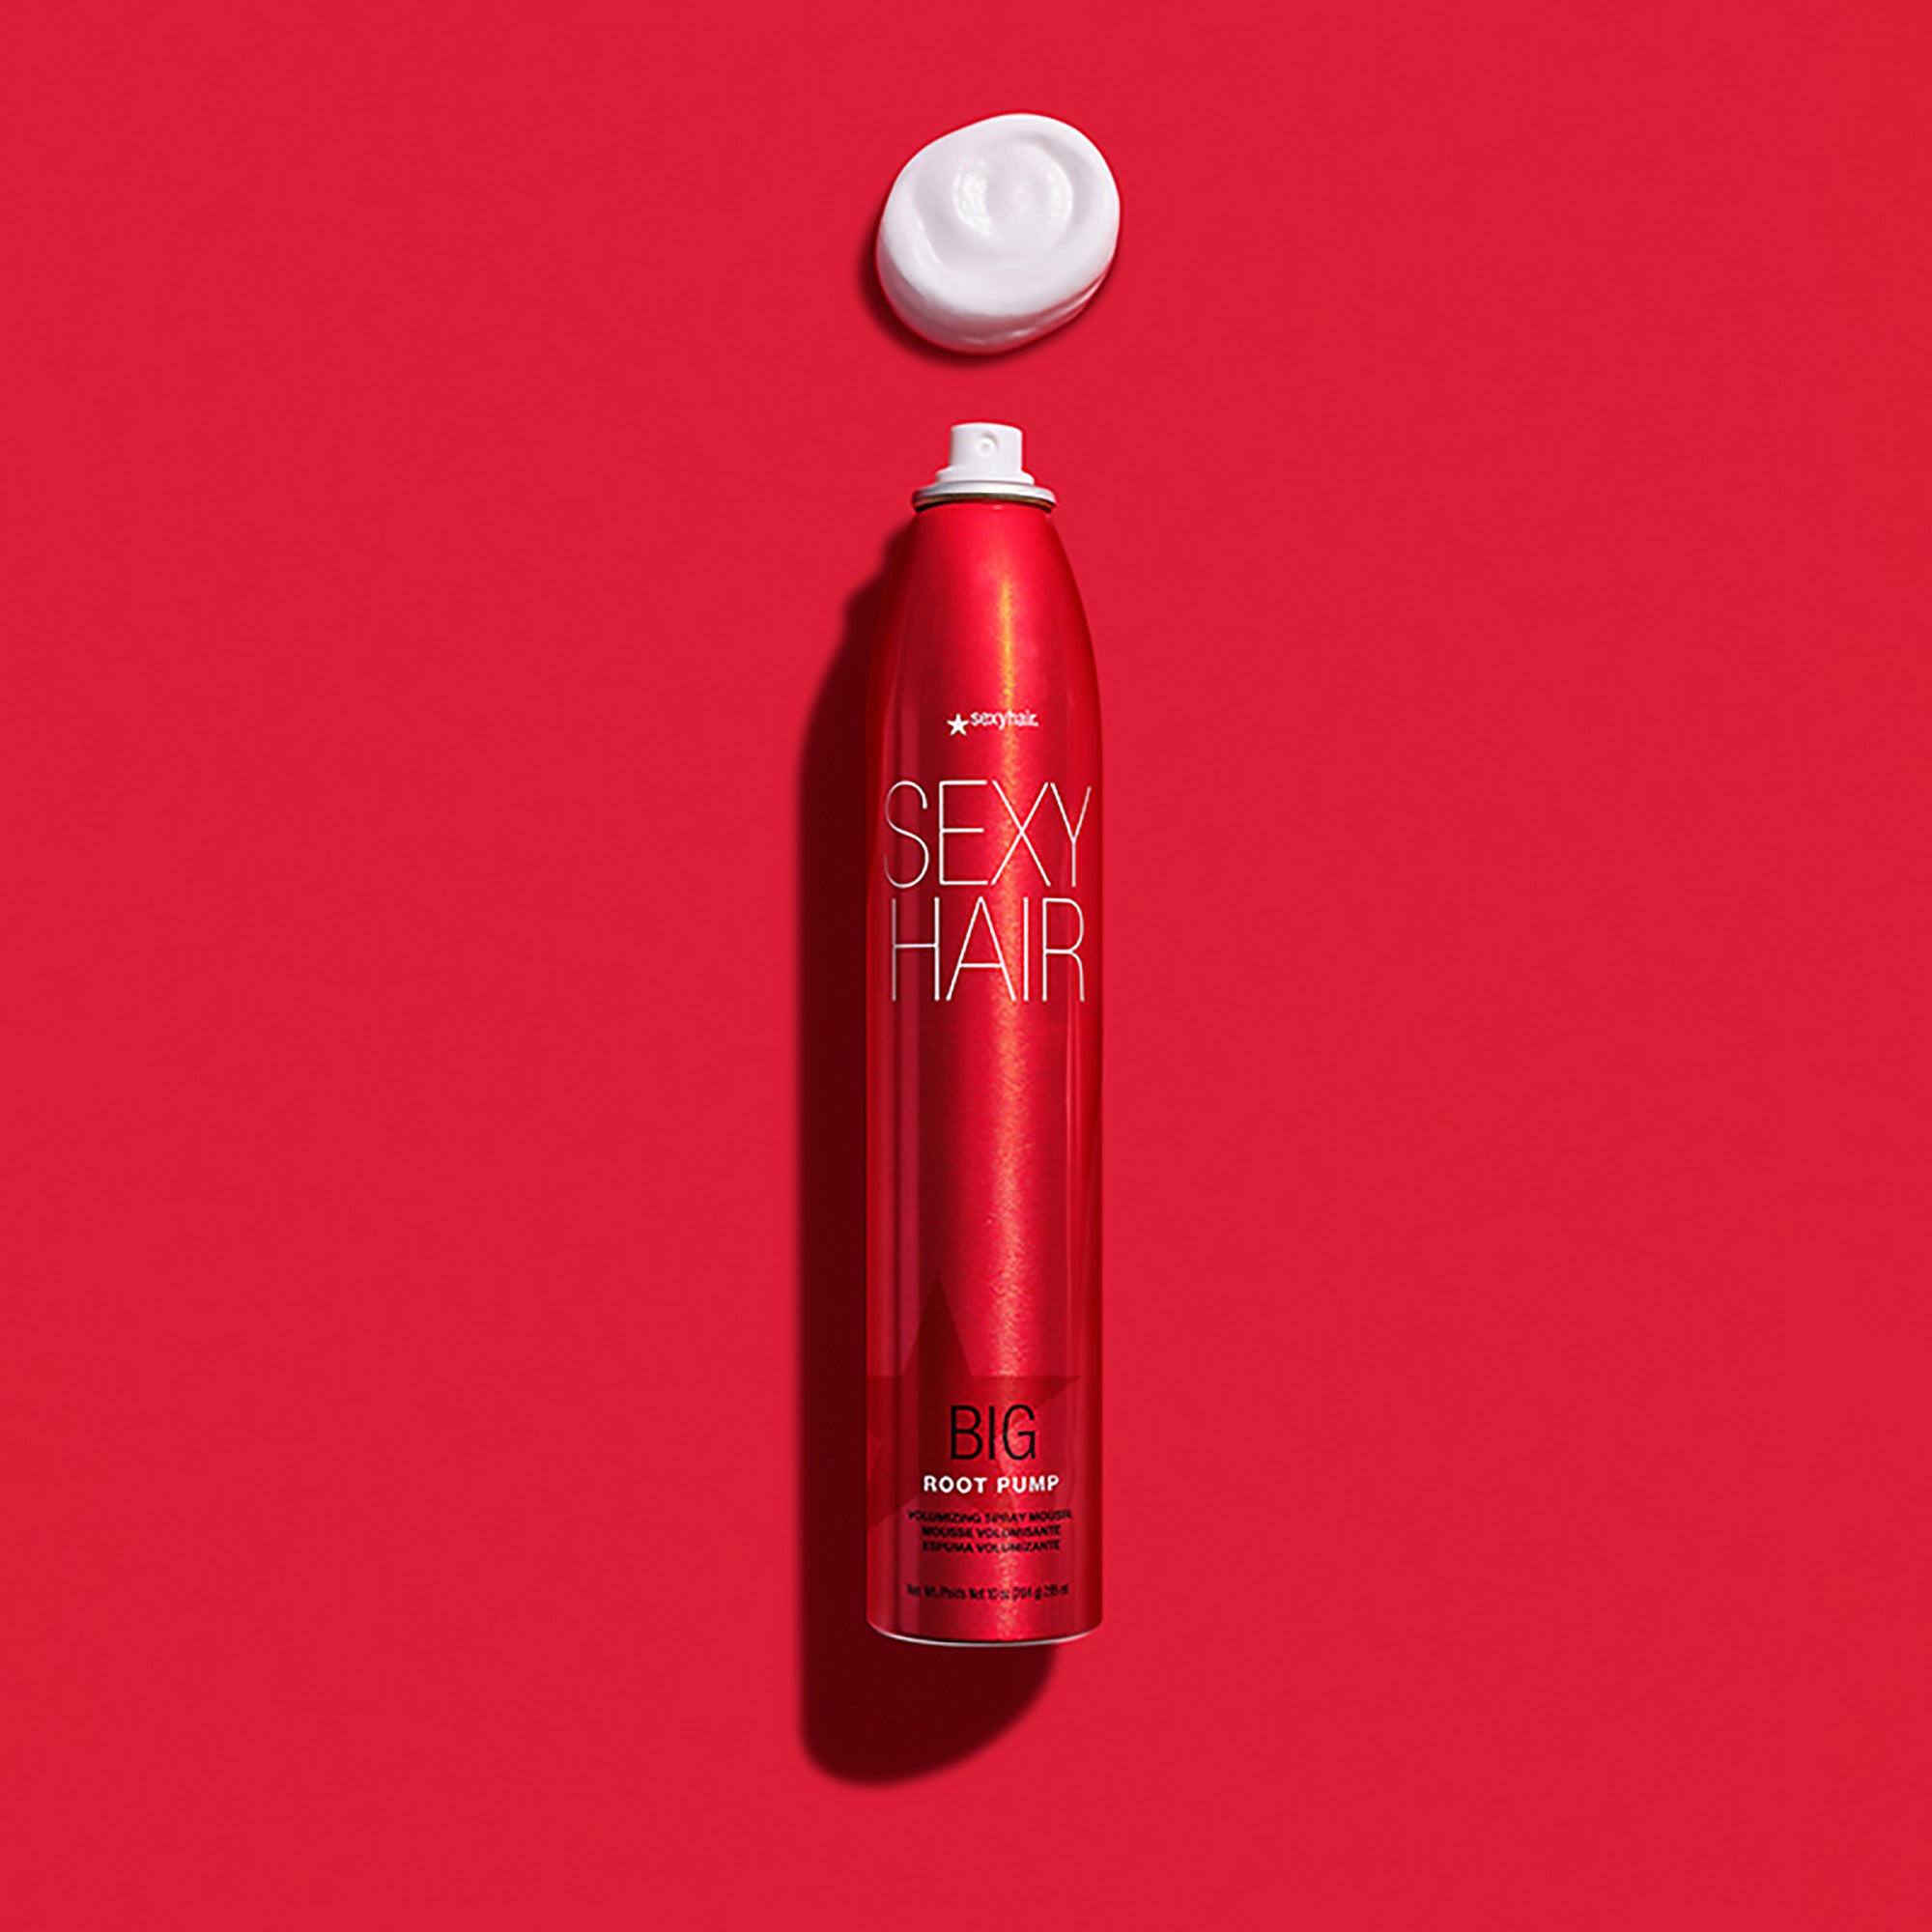 Sexy Hair Big SexyHair Root Pump Humidity Resistant Volumizing Spray Mousse / 10